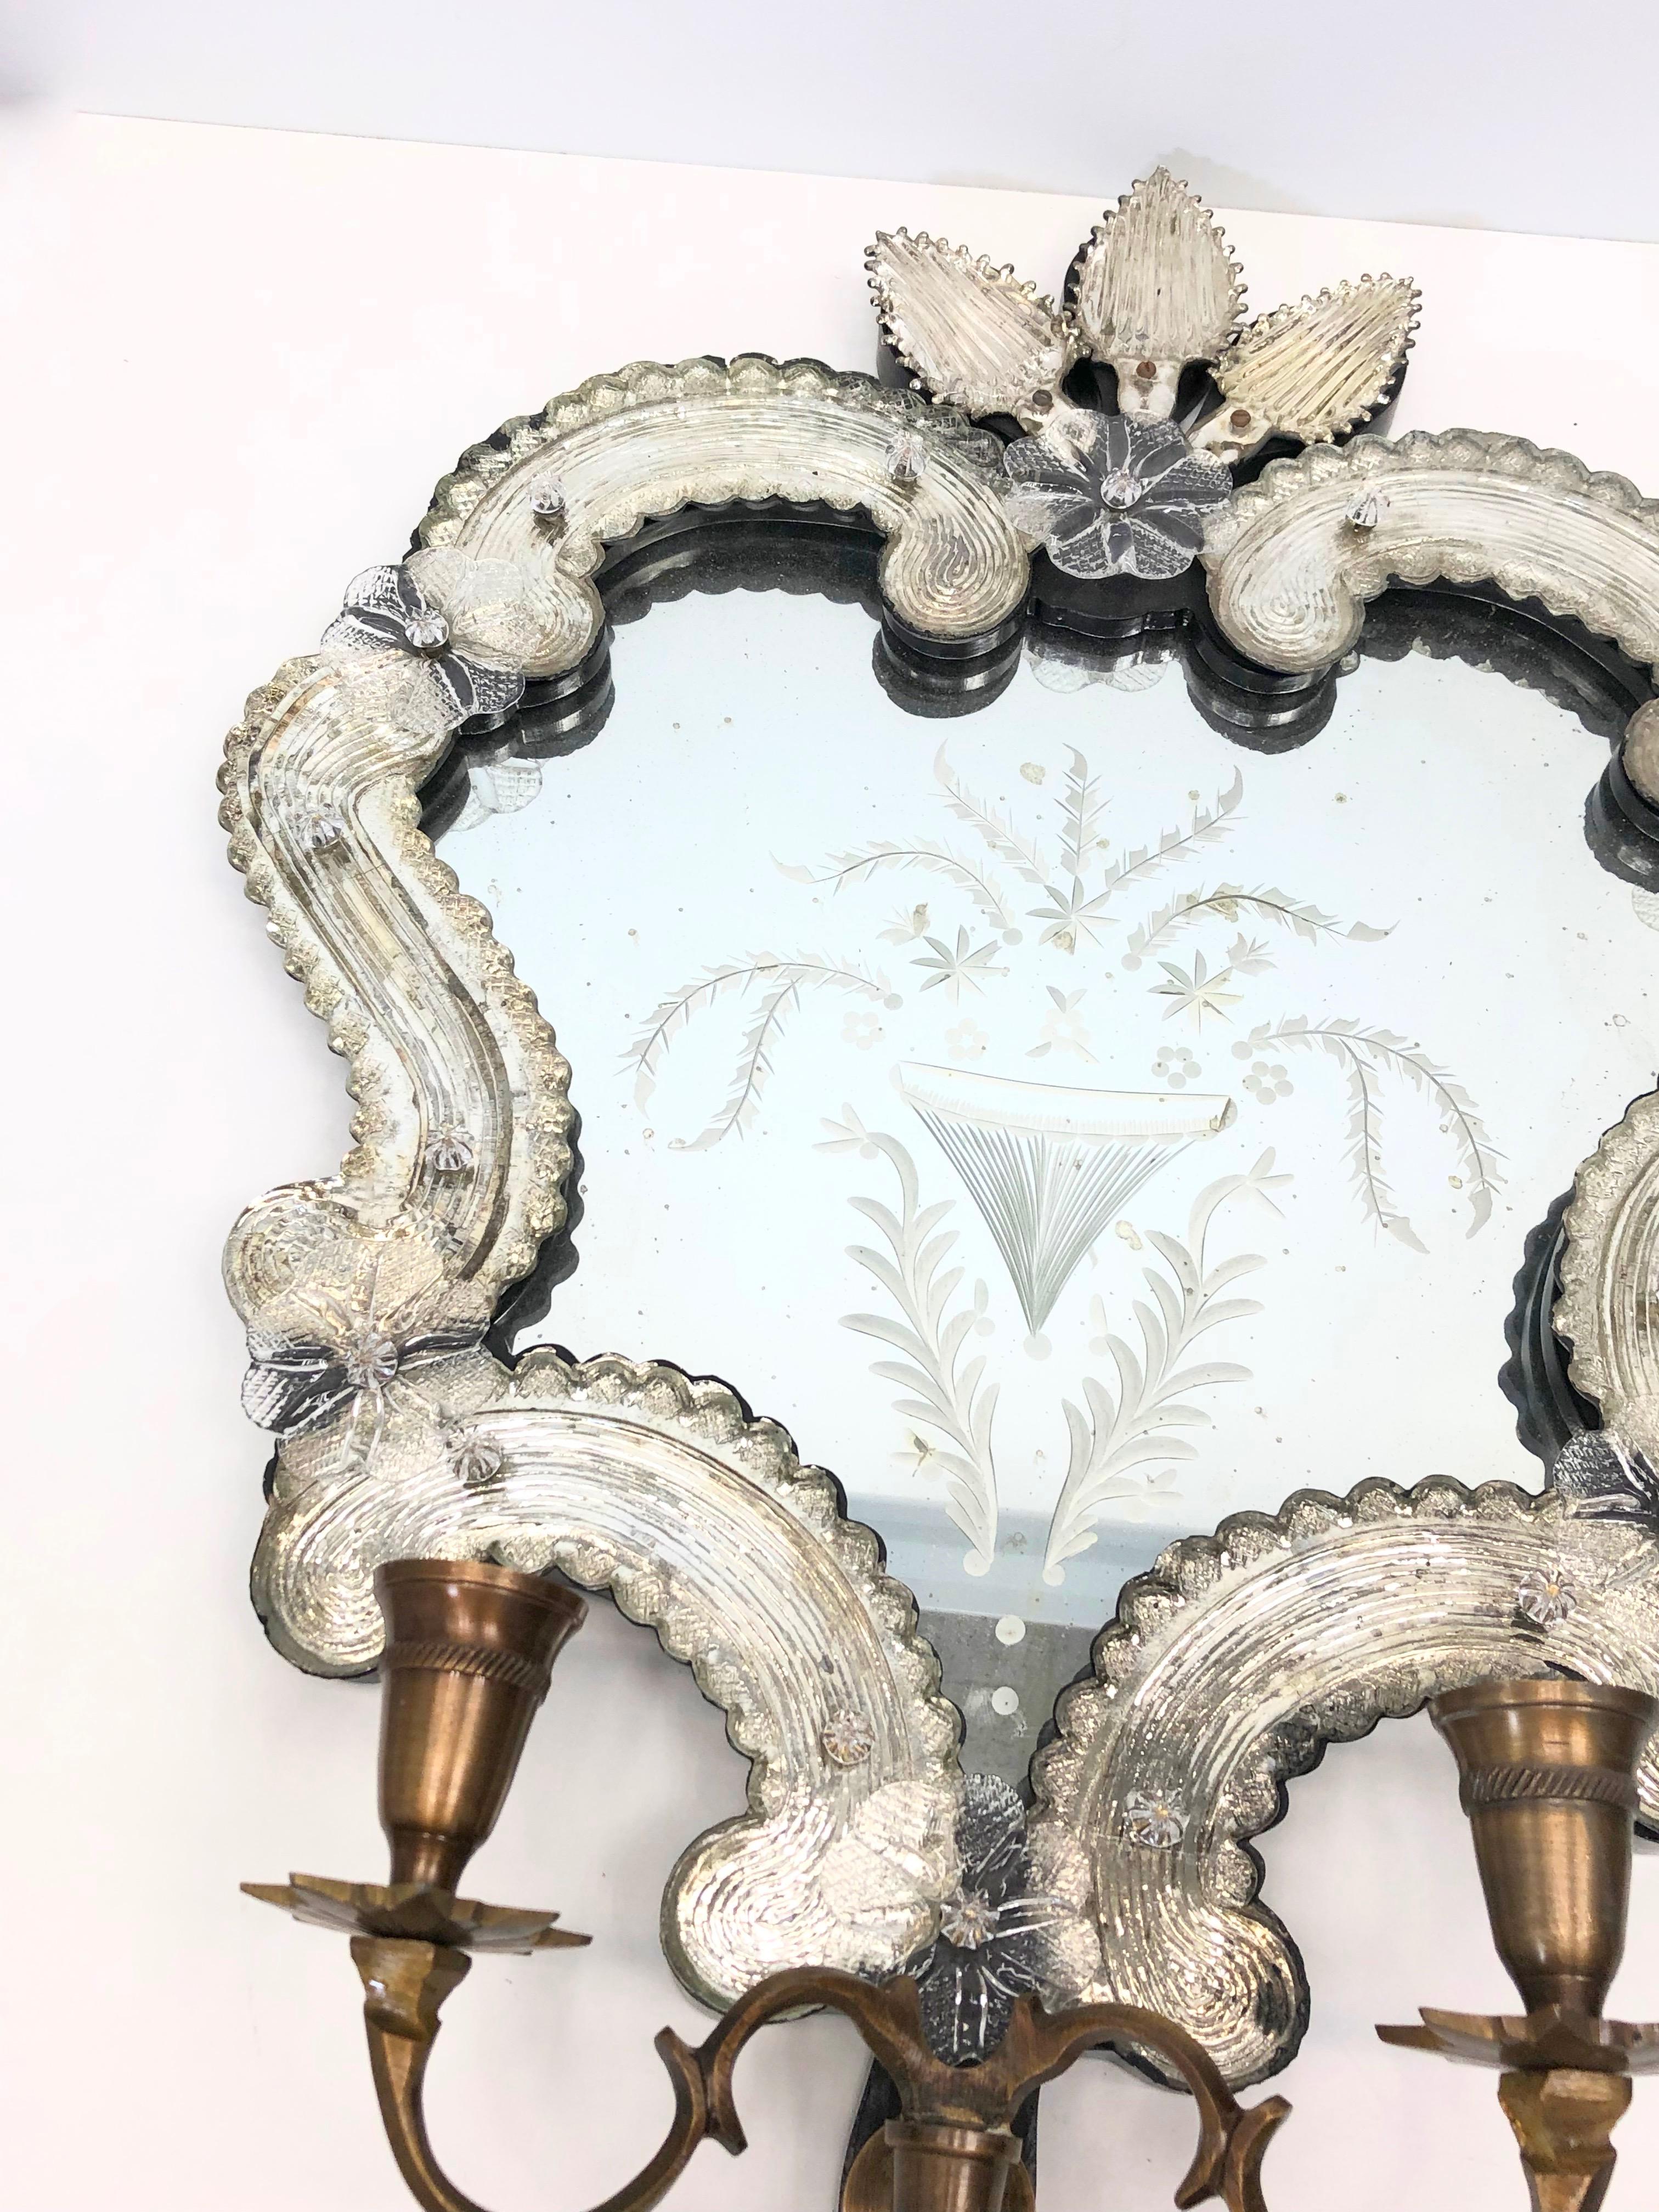 Vintage Pair of Venetian Murano Glass Mirror Sconces for Candles Candlestick For Sale 1